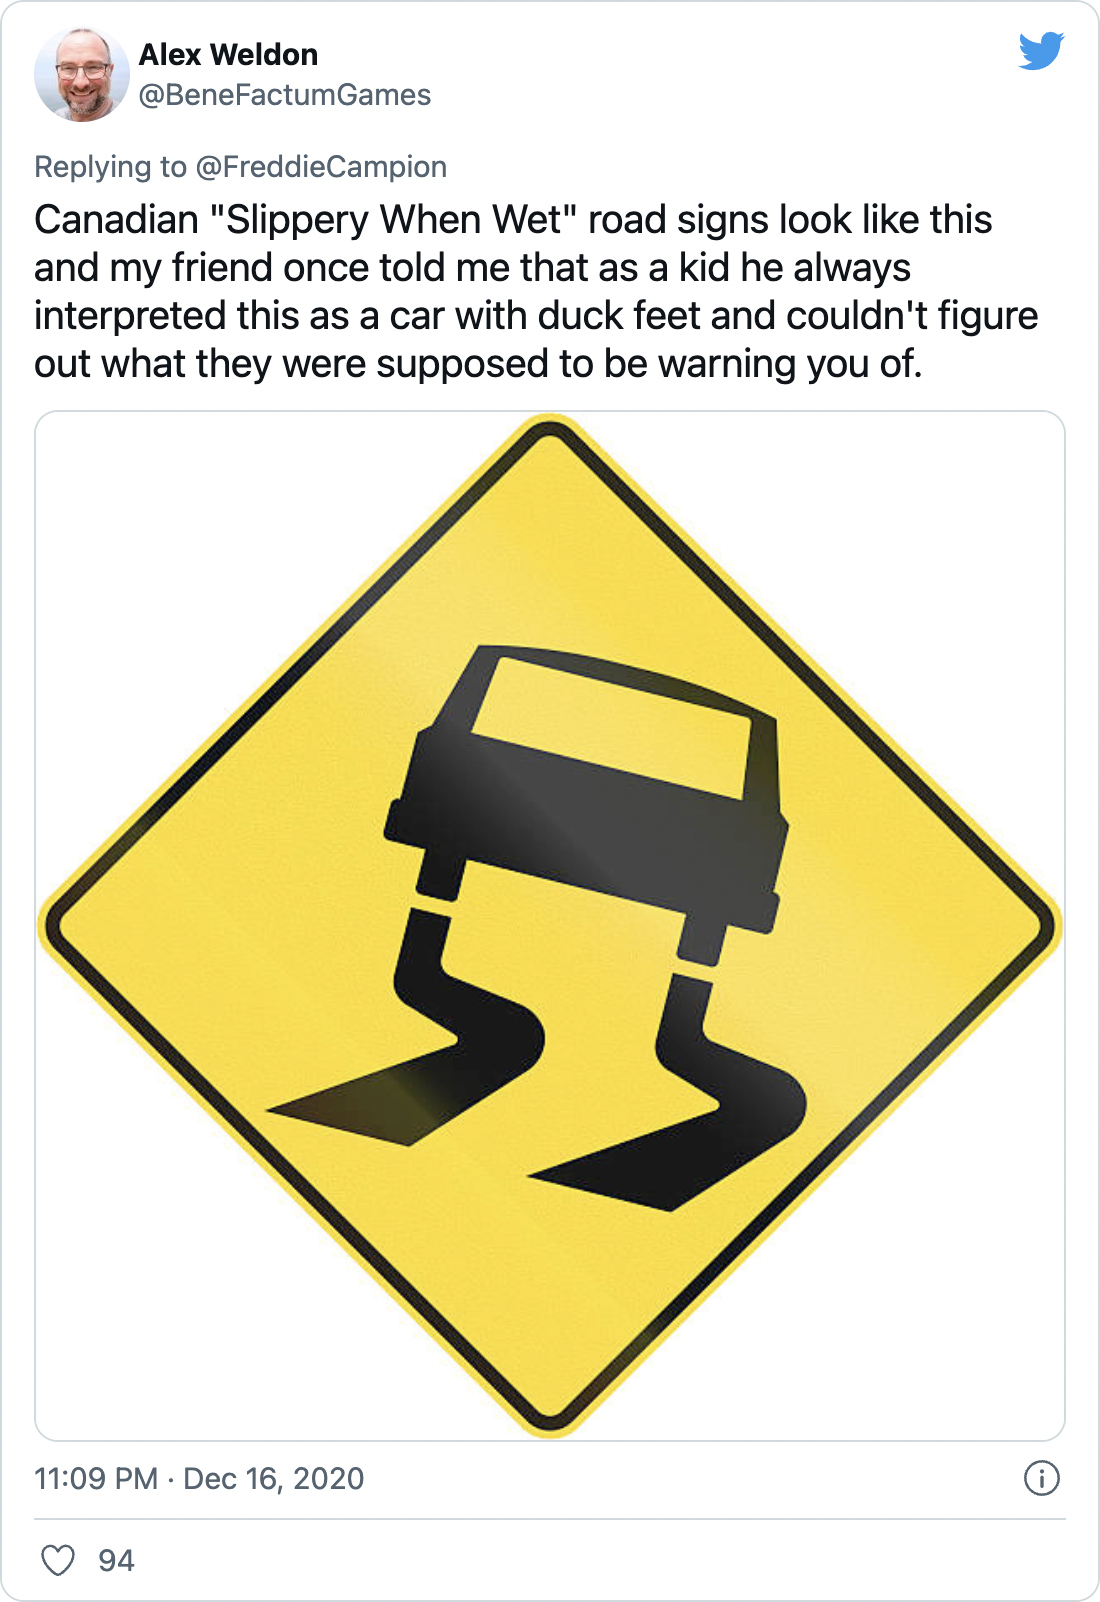 Canadian "Slippery When Wet" road signs look like this and my friend once told me that as a kid he always interpreted this as a car with duck feet and couldn't figure out what they were supposed to be warning you of. - @BeneFactumGames